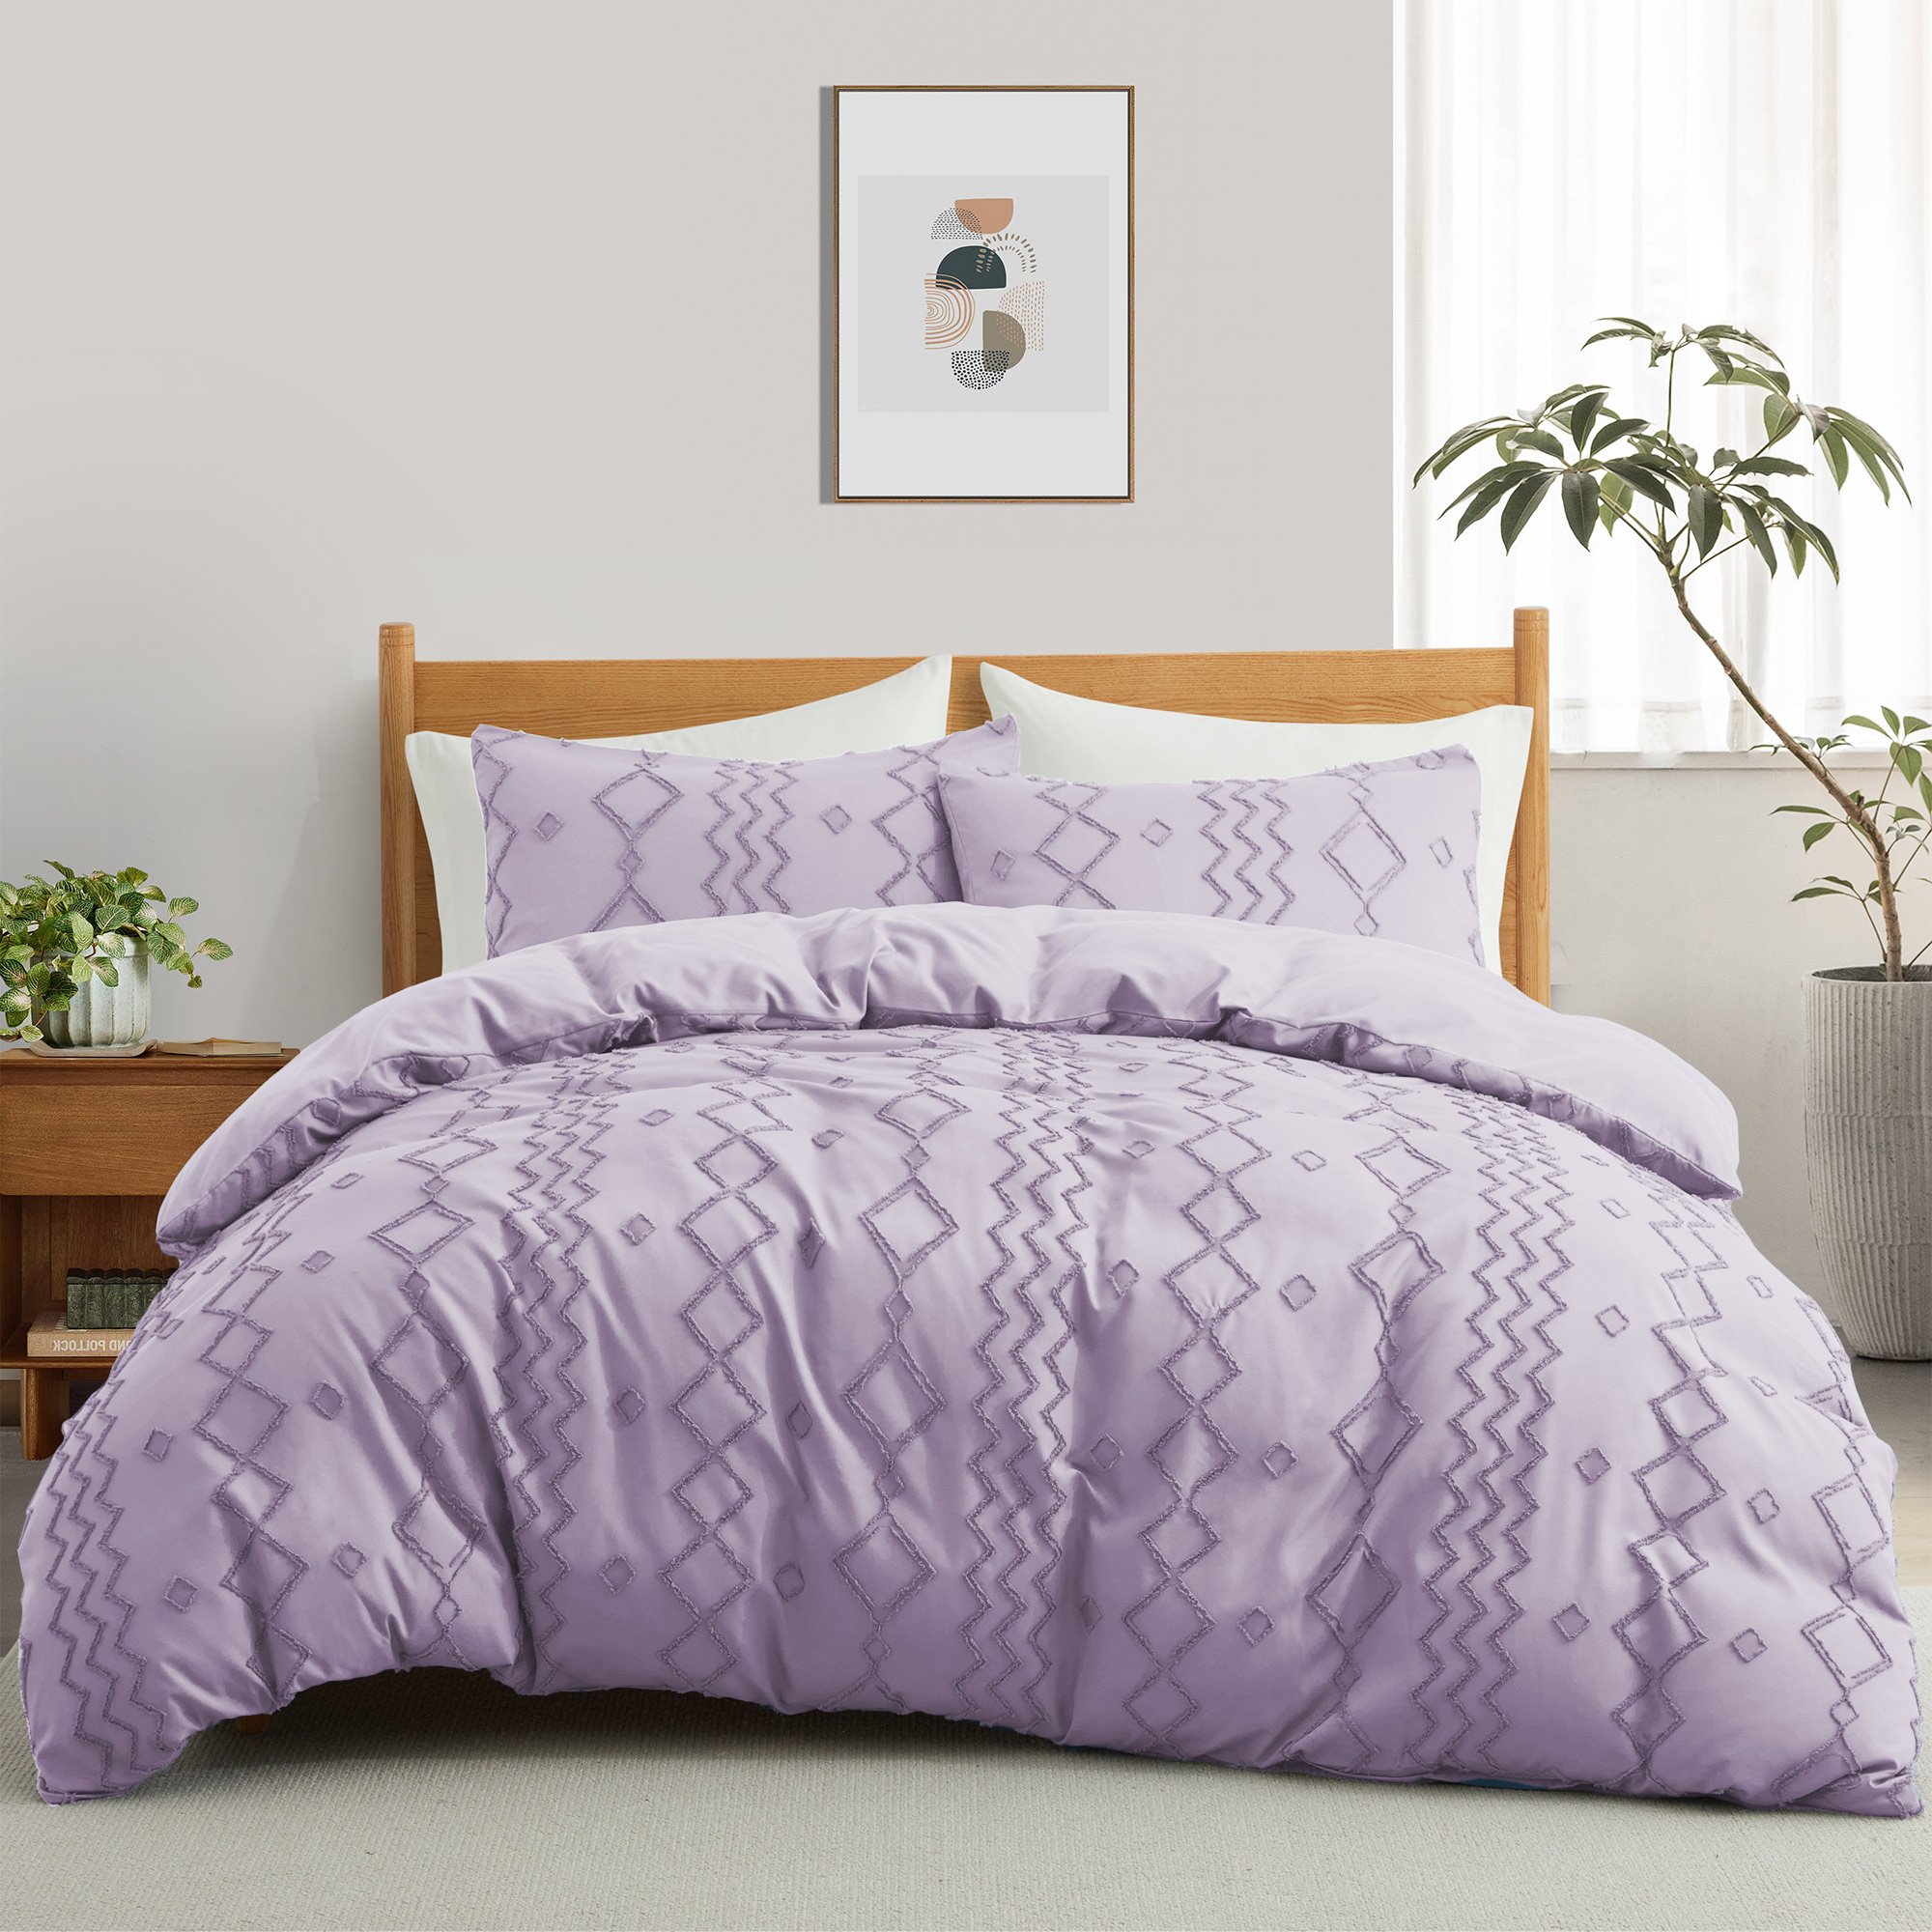 Basic Bedding Sets With All Season Goose Down Feather Comforter, 2 Pack Goose Down Pillows, Duvet Cover Set - Purple Bundles Option, Twin Si